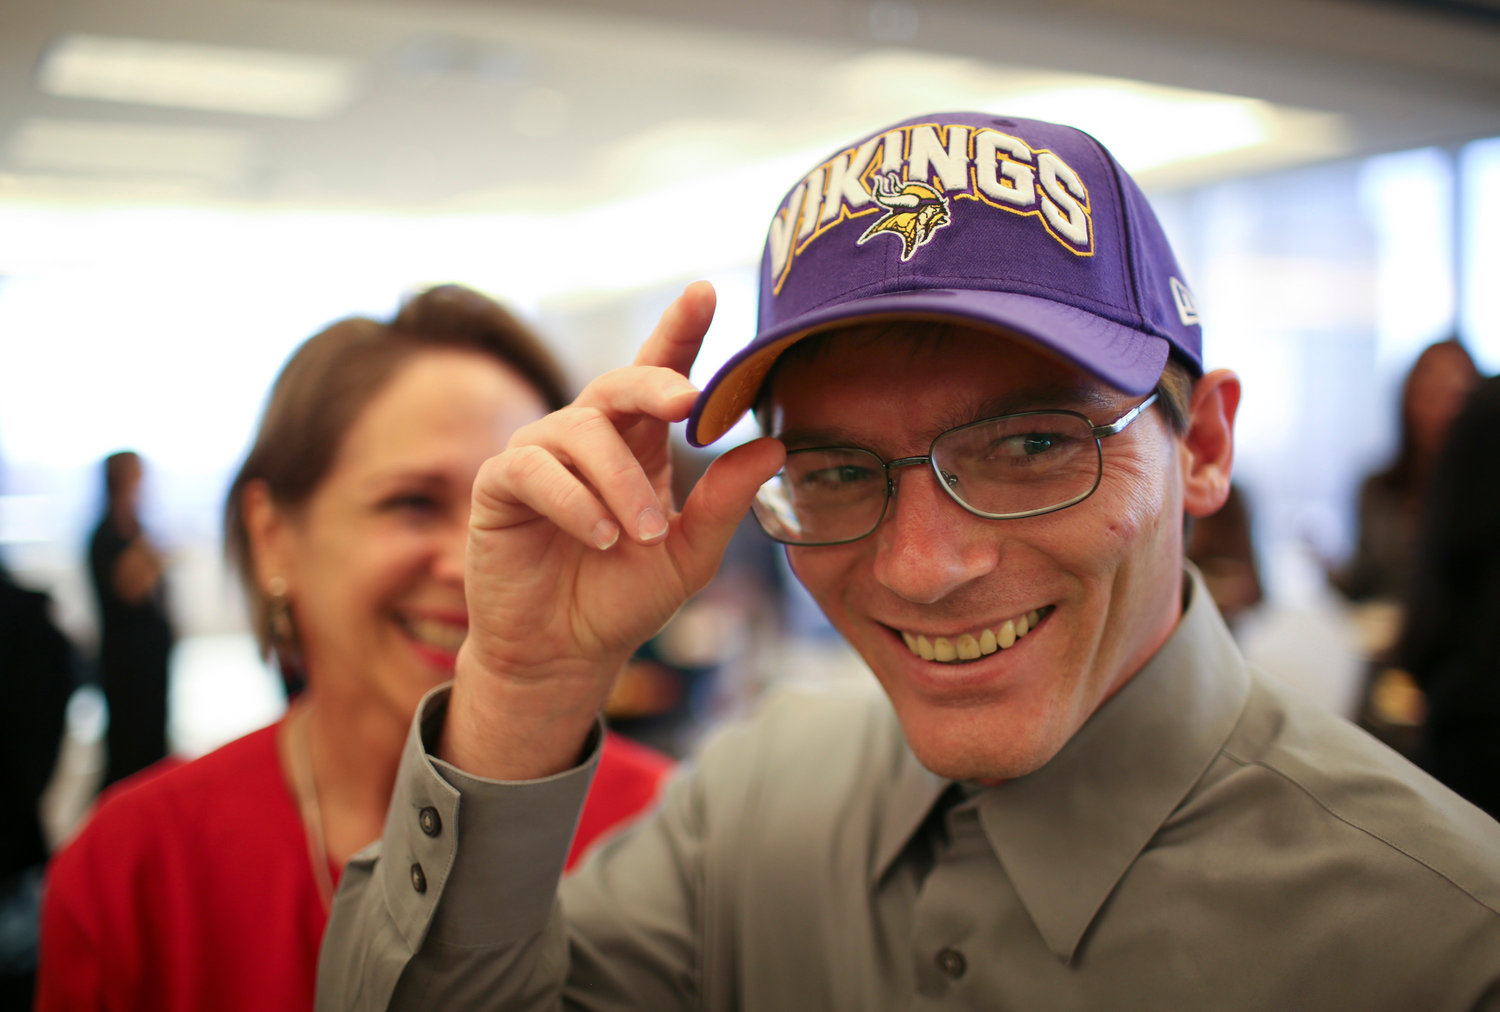 A Minnesota Vikings cap was one of the gifts Damon Thibodeaux received at a reception at Fredrikson & Byron to welcome him to Minneapolis on October 12, 2012. (Jeff Wheeler/Minneapolis Star Tribune/TNS)